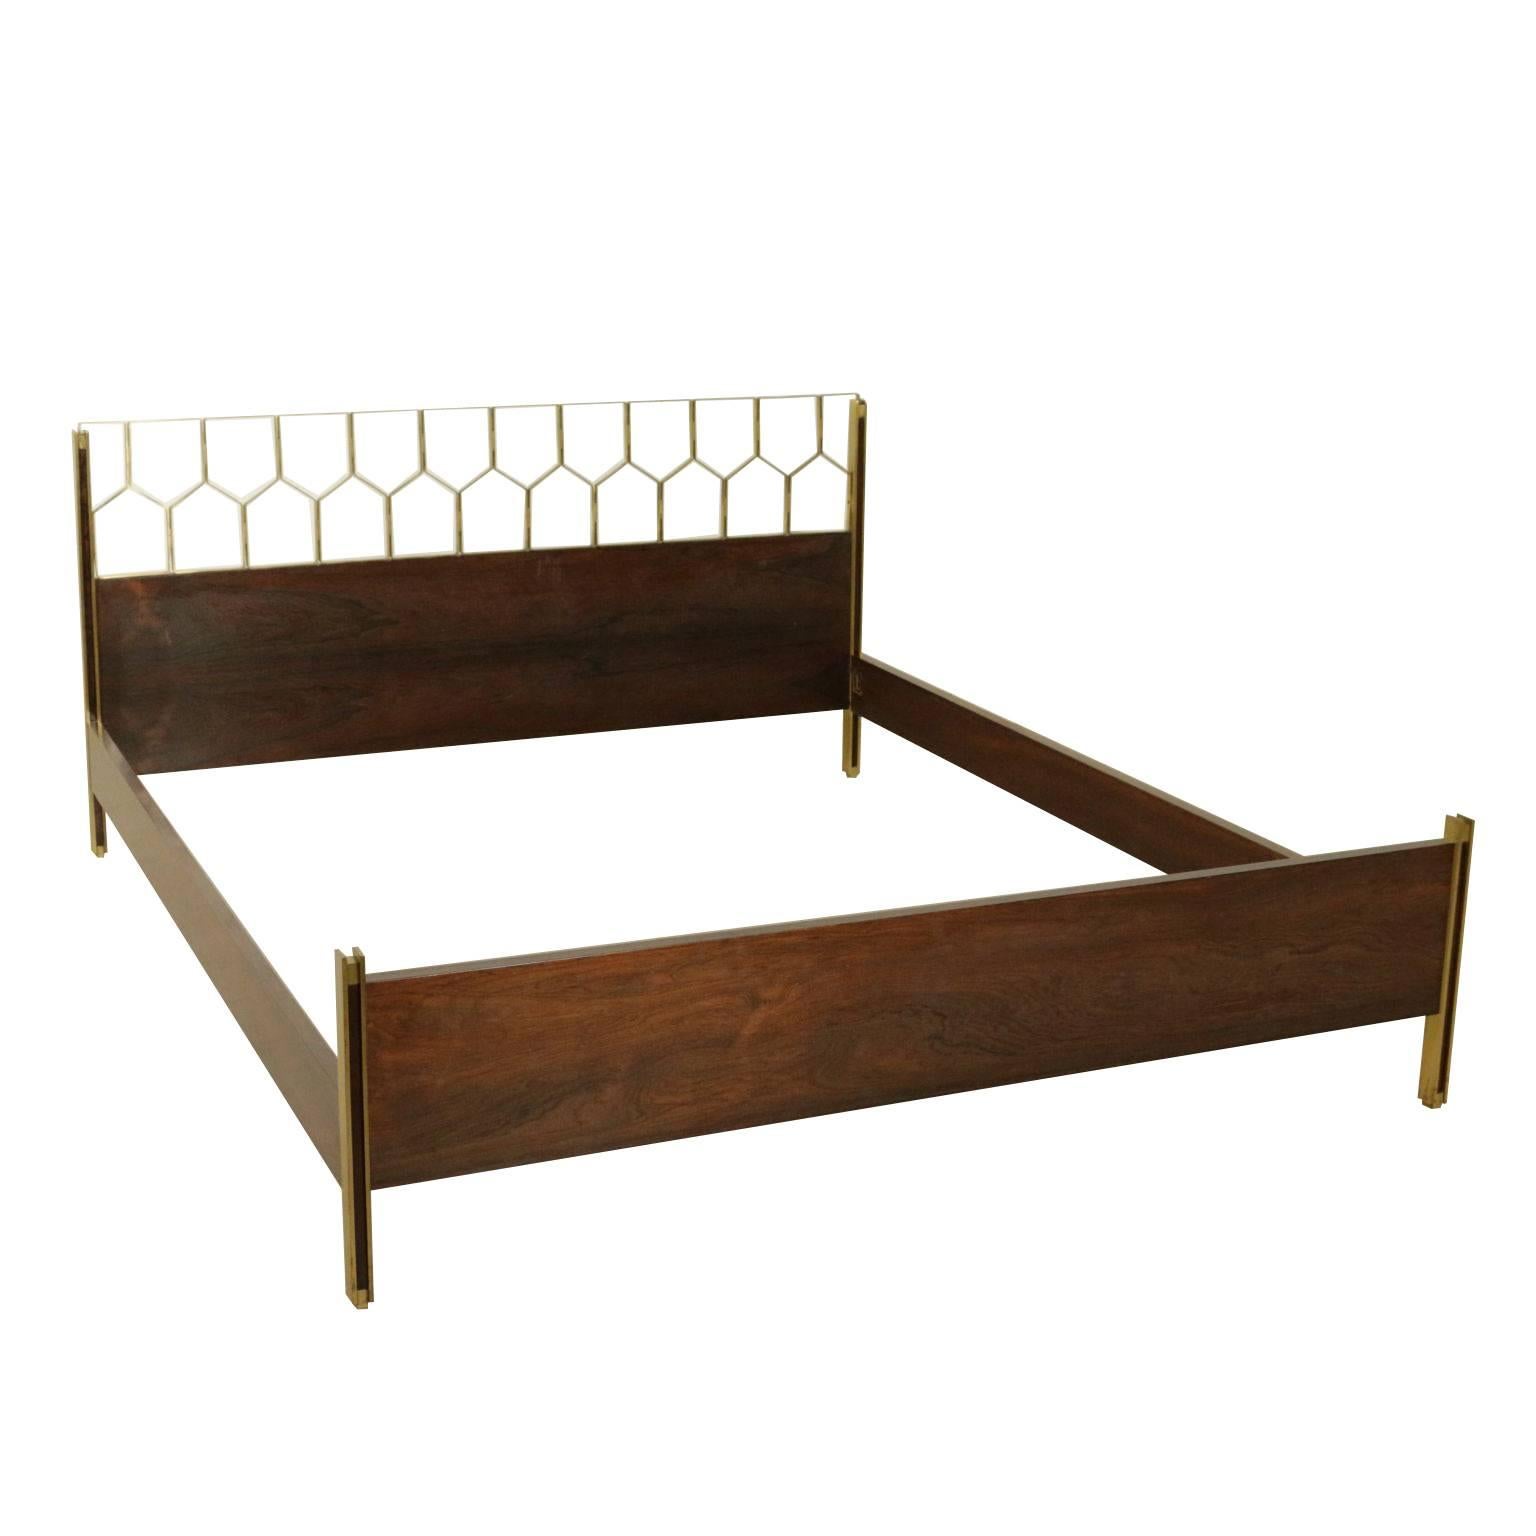 Double Bed Rosewood Veneer Brass Vintage Manufactured in Italy 1960s